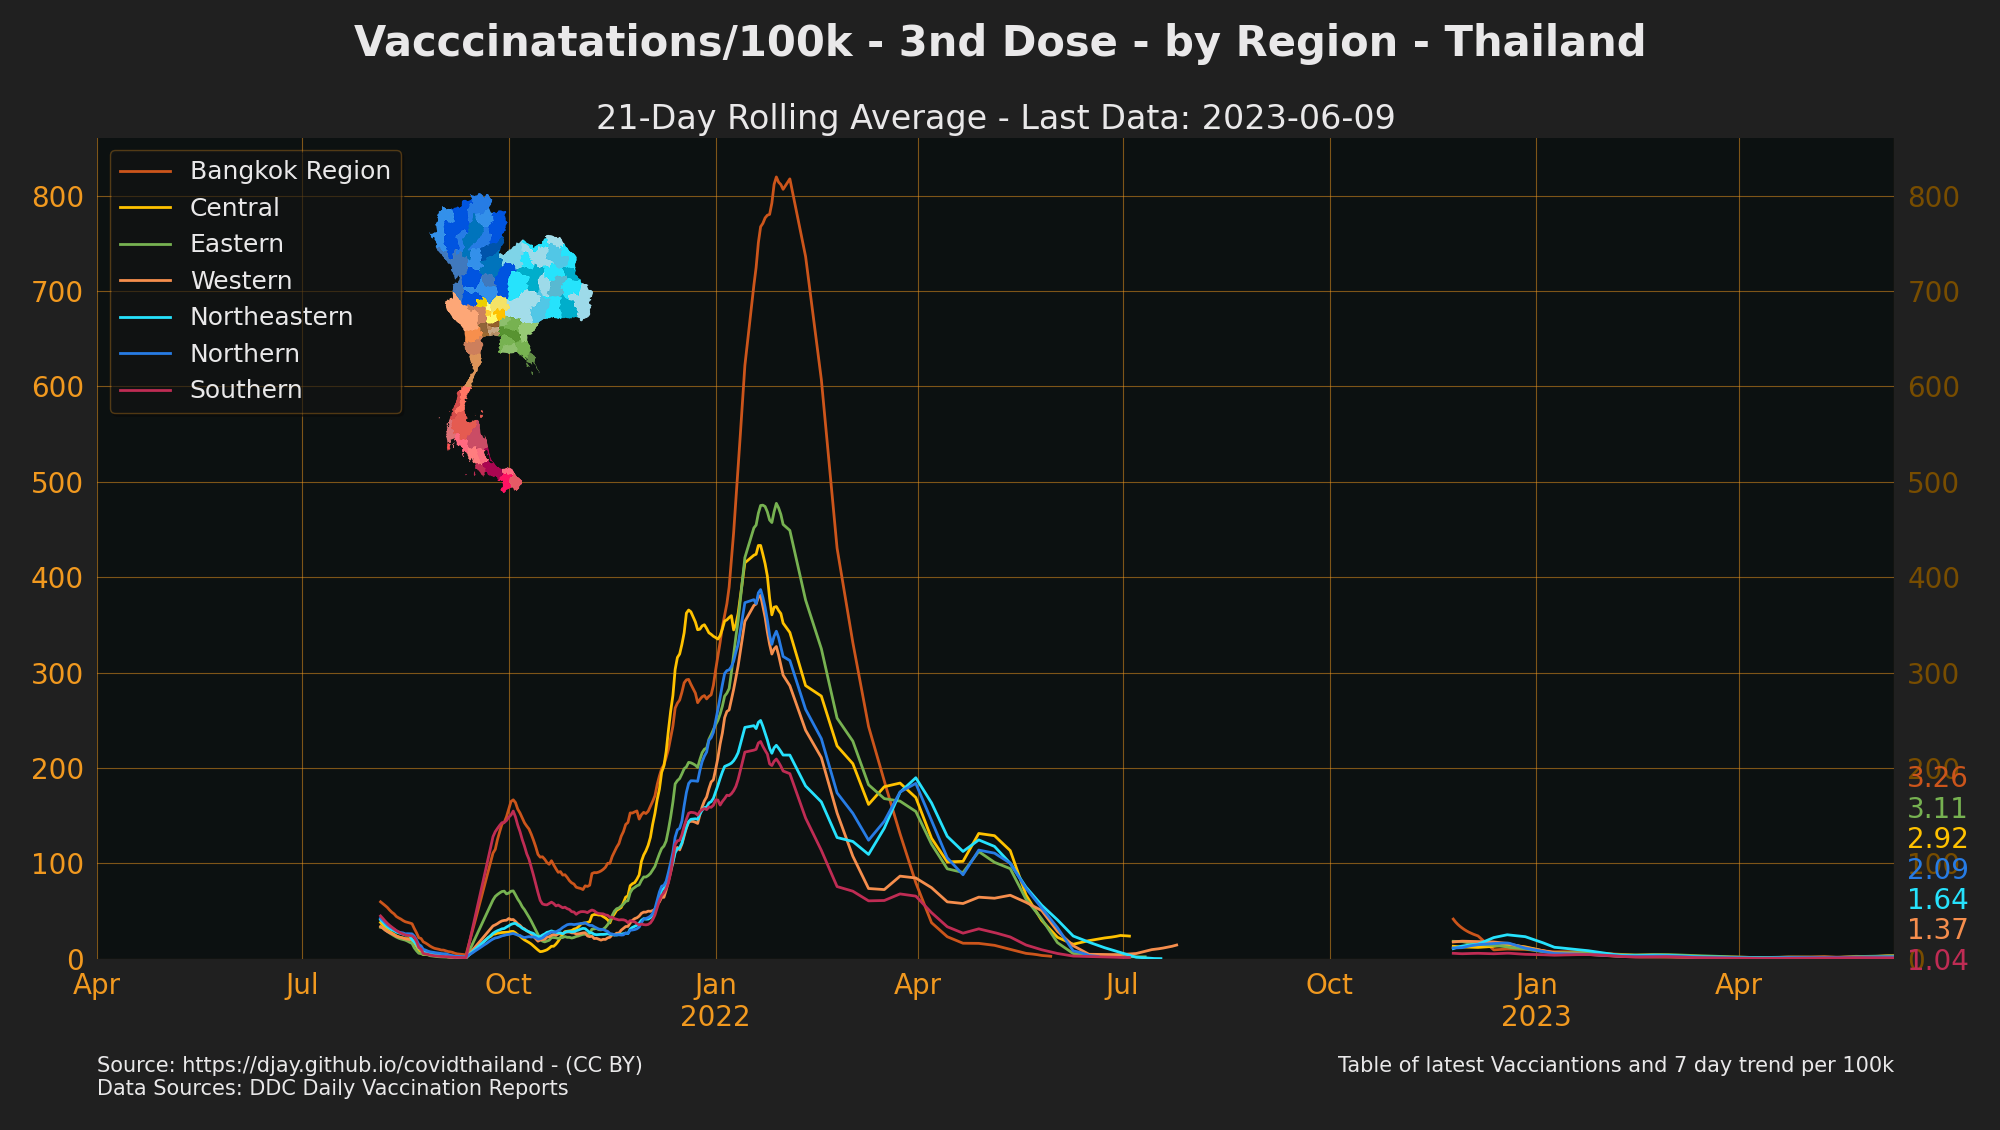 Vaccine Doses given by Region